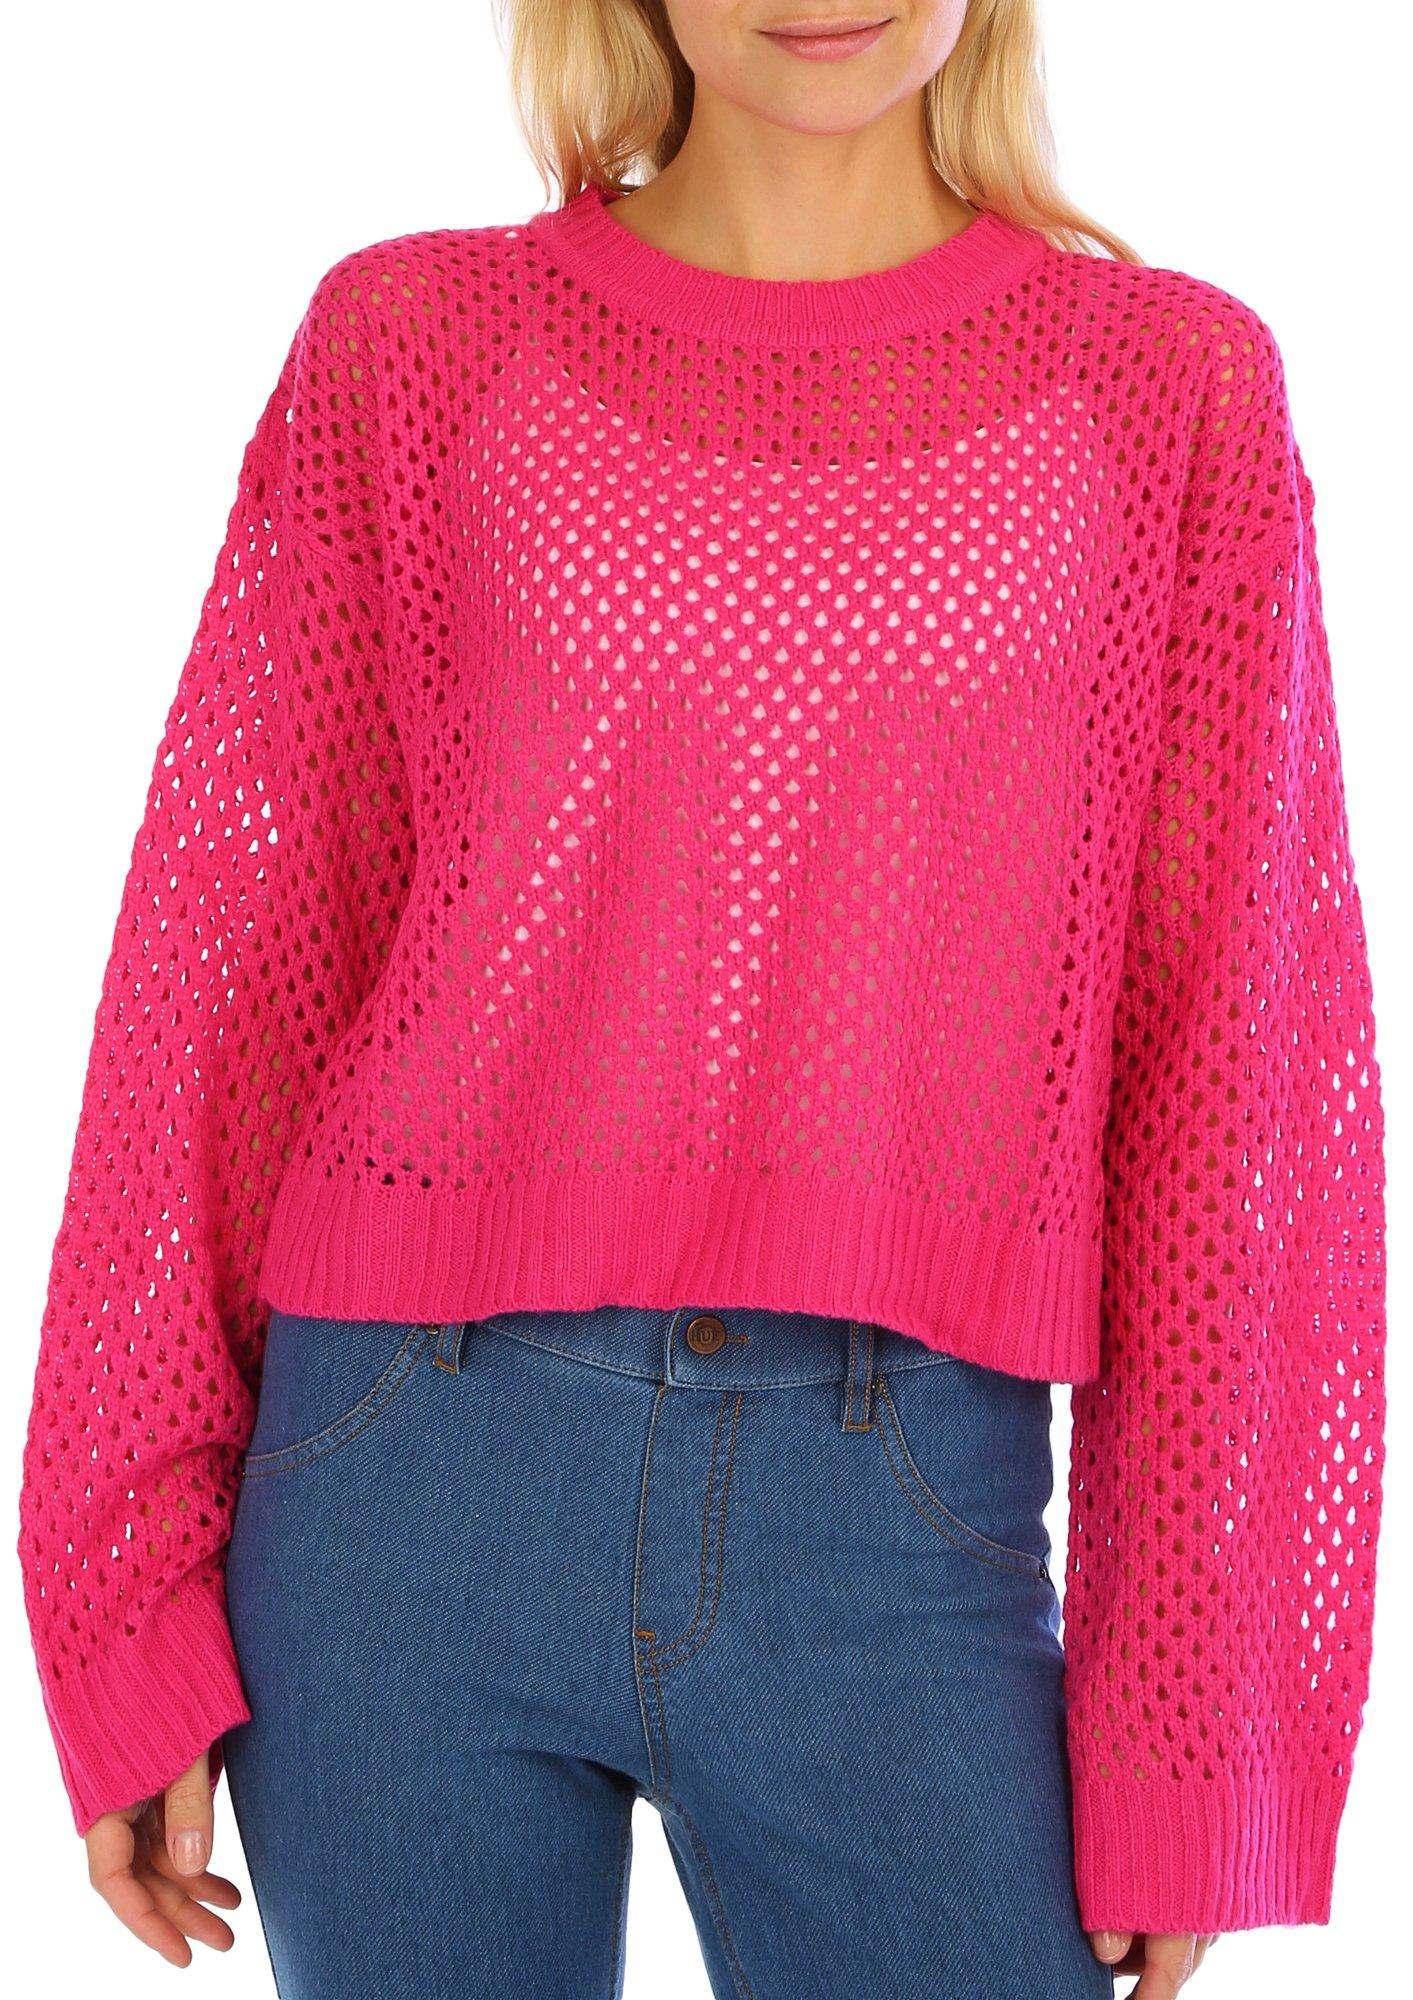 Juniors Solid Open Weave Pullover Sweater